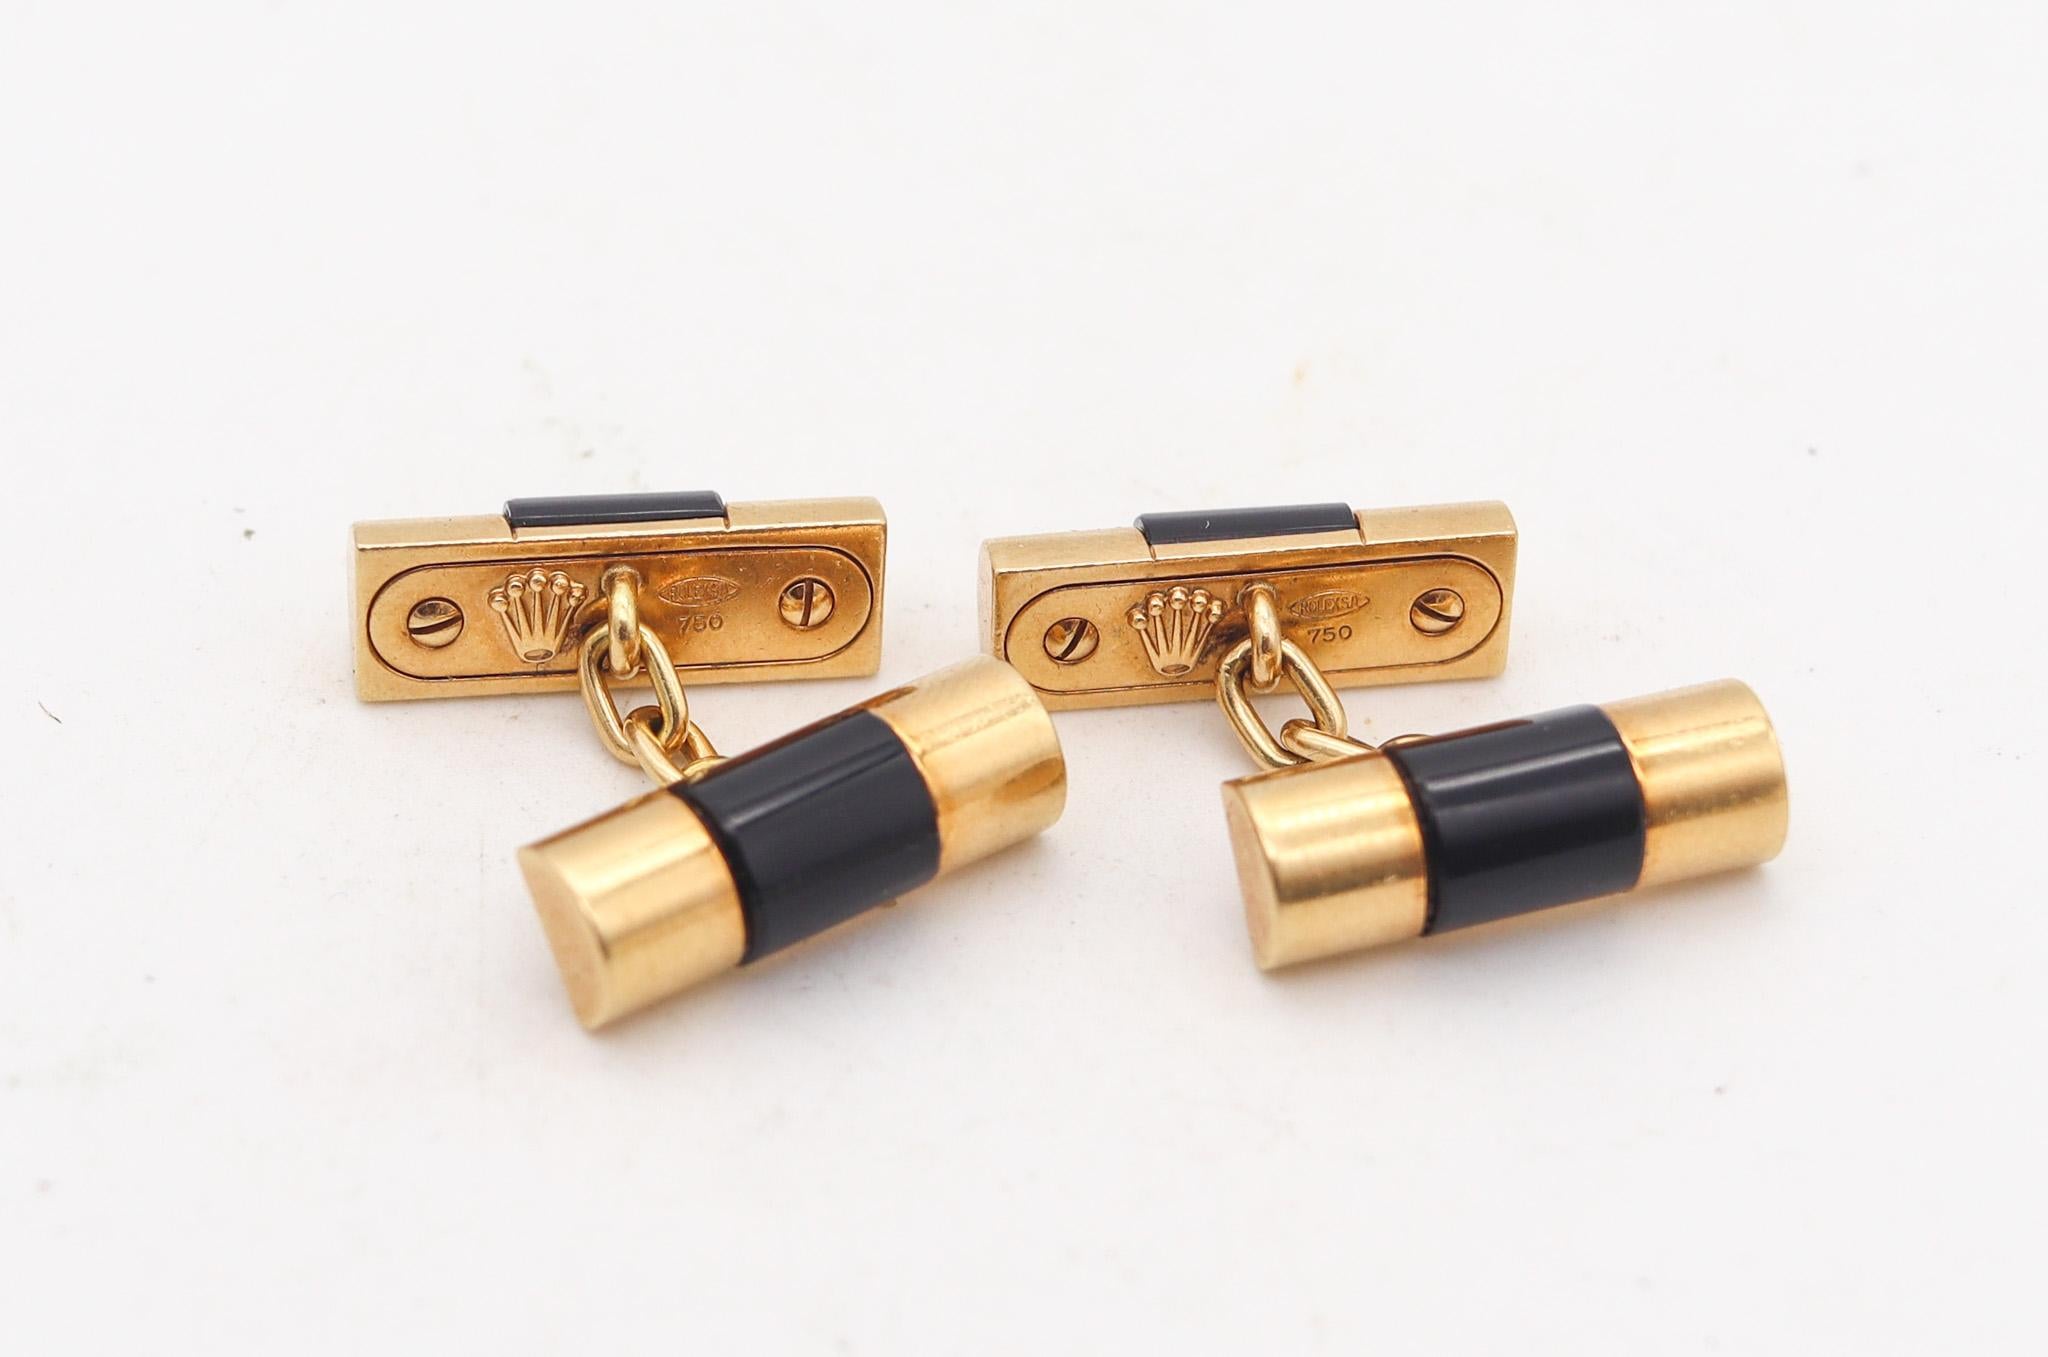 Modernist Rolex Swiss President Curved Links Cufflinks In 18Kt Gold With 4 Black Onyxes For Sale